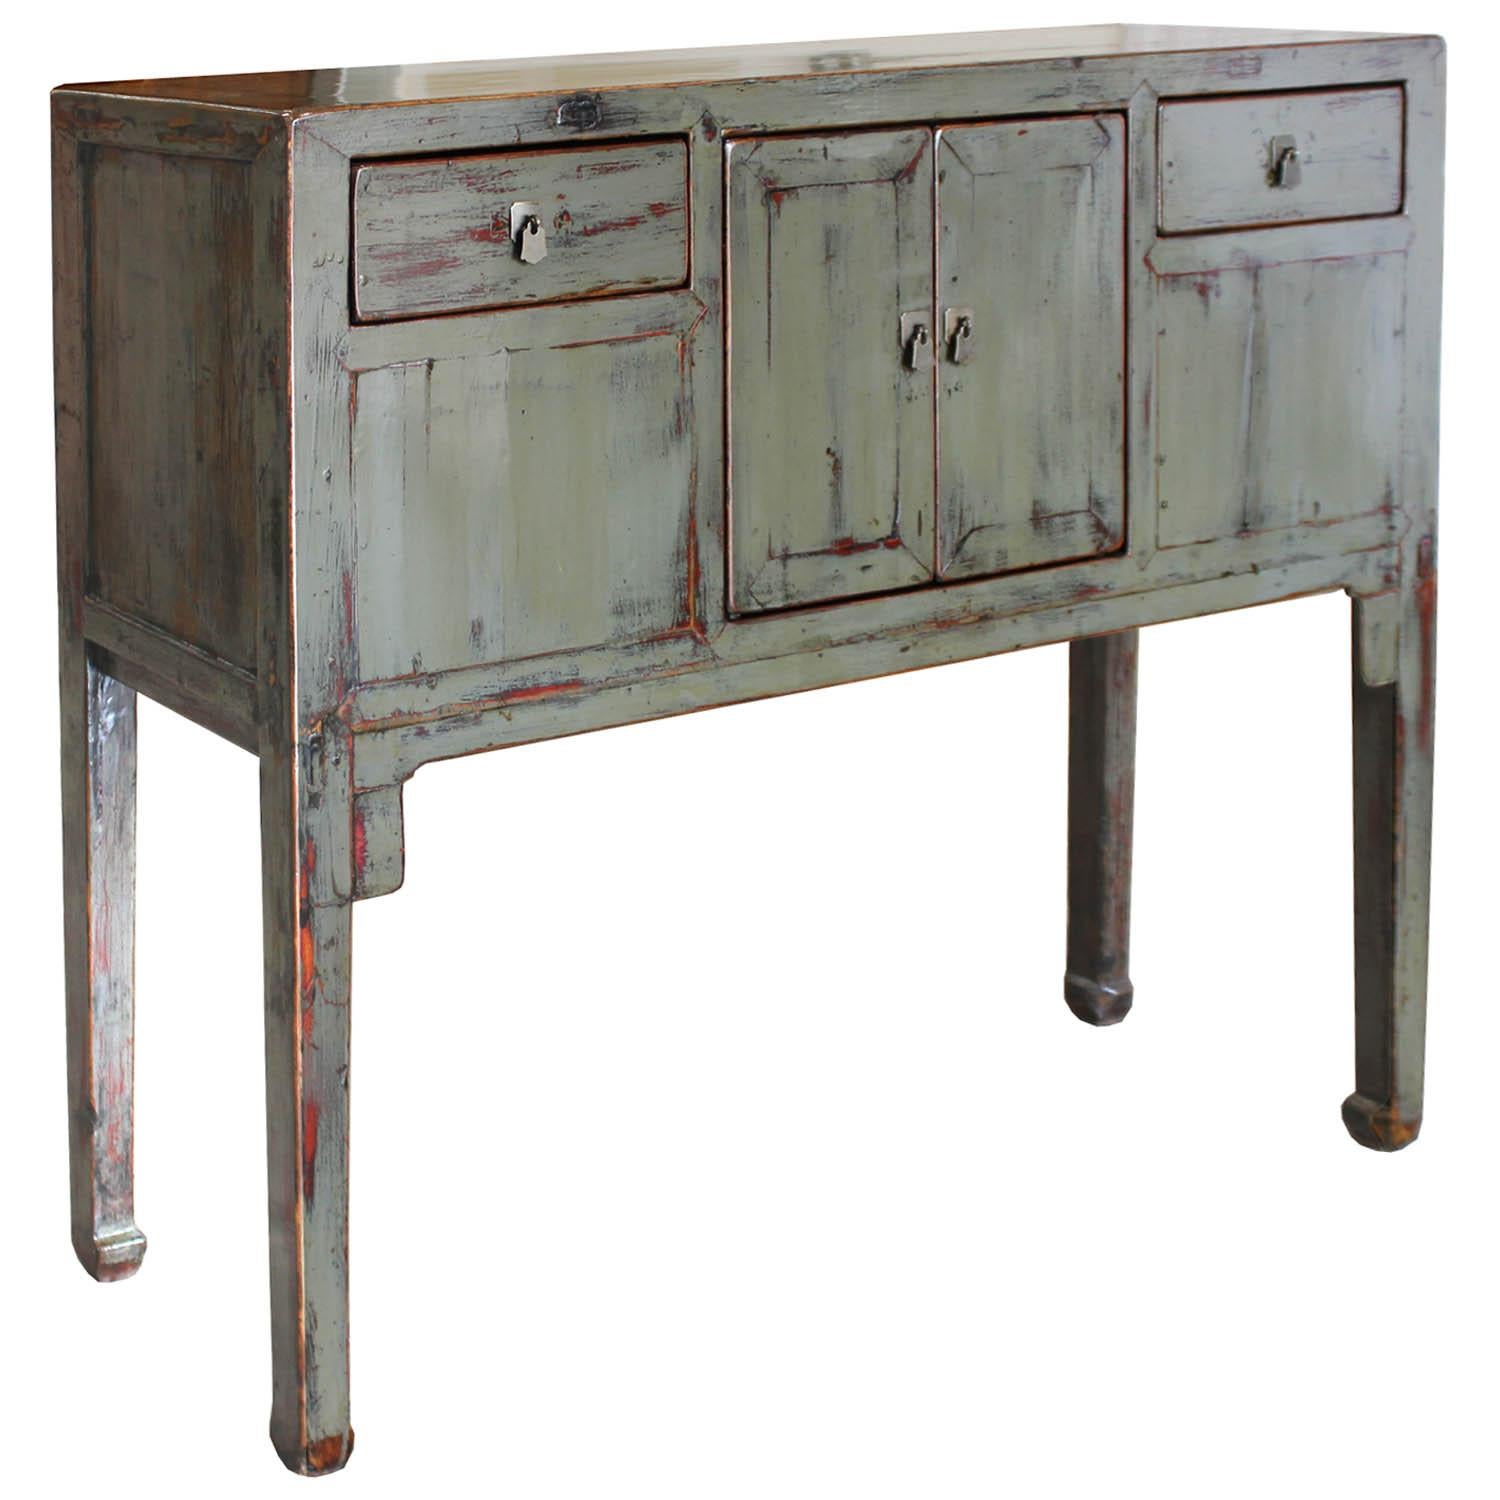 Gray lacquer buffet with clean lines and exposed wood edges features subtle distressing, red under-tone, high legs and horse hoof-style feet. Place in an entry way and place keys and other accessories in the drawers. New hardware.
 